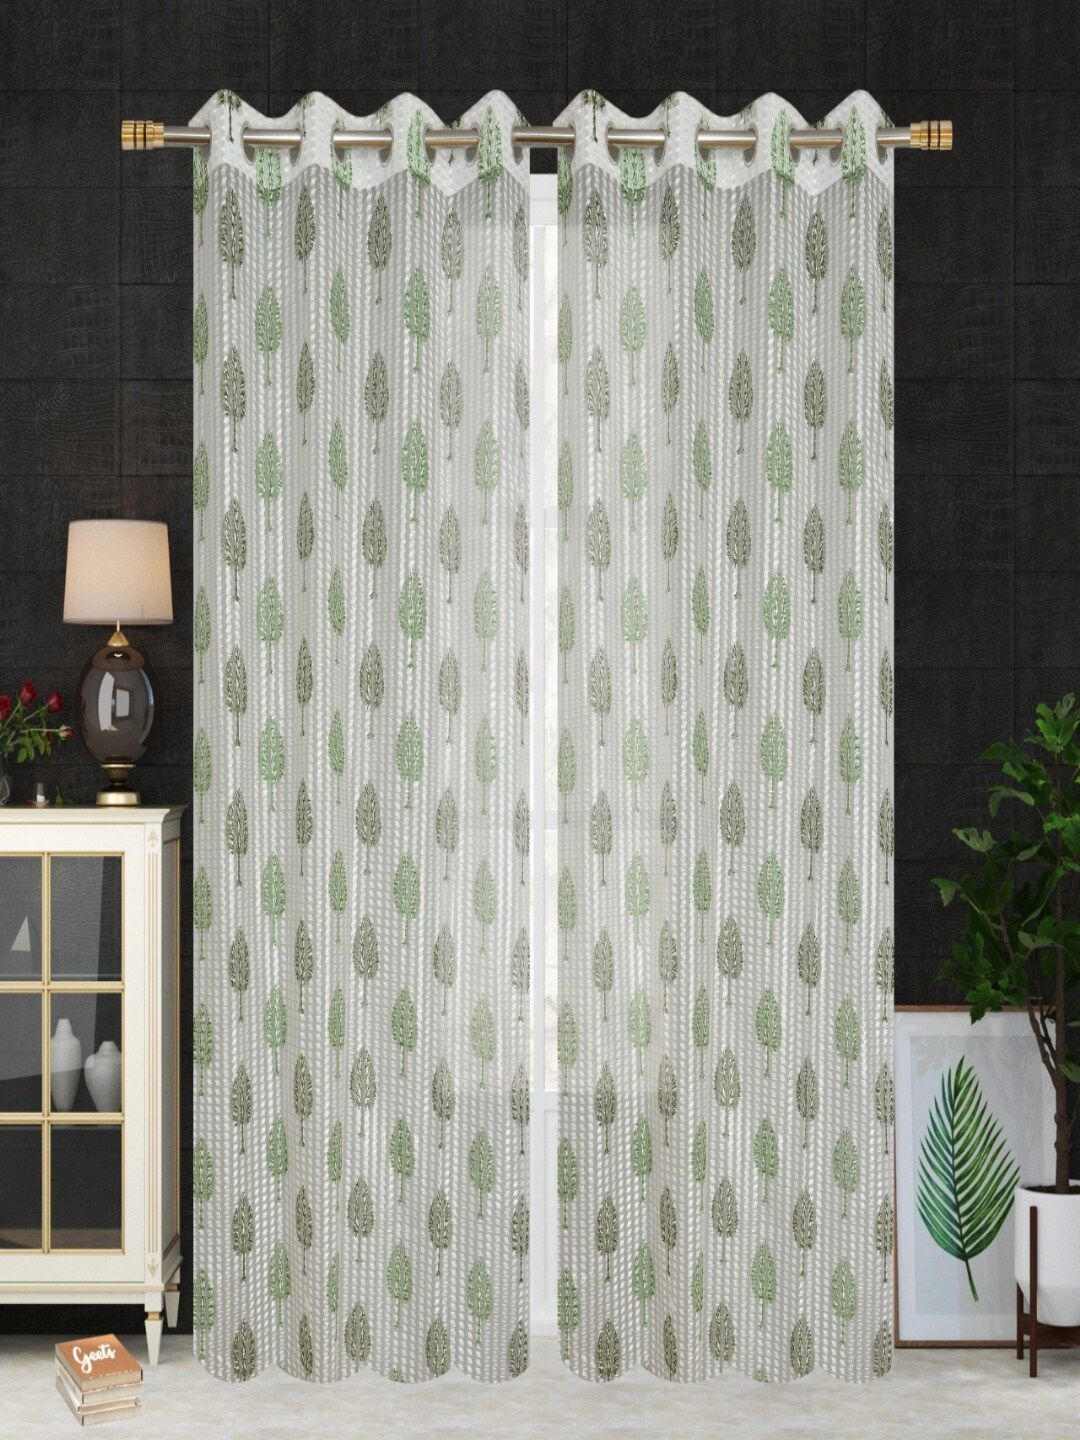 Homefab India Green Set of 2 Floral Sheer Window Curtain Price in India